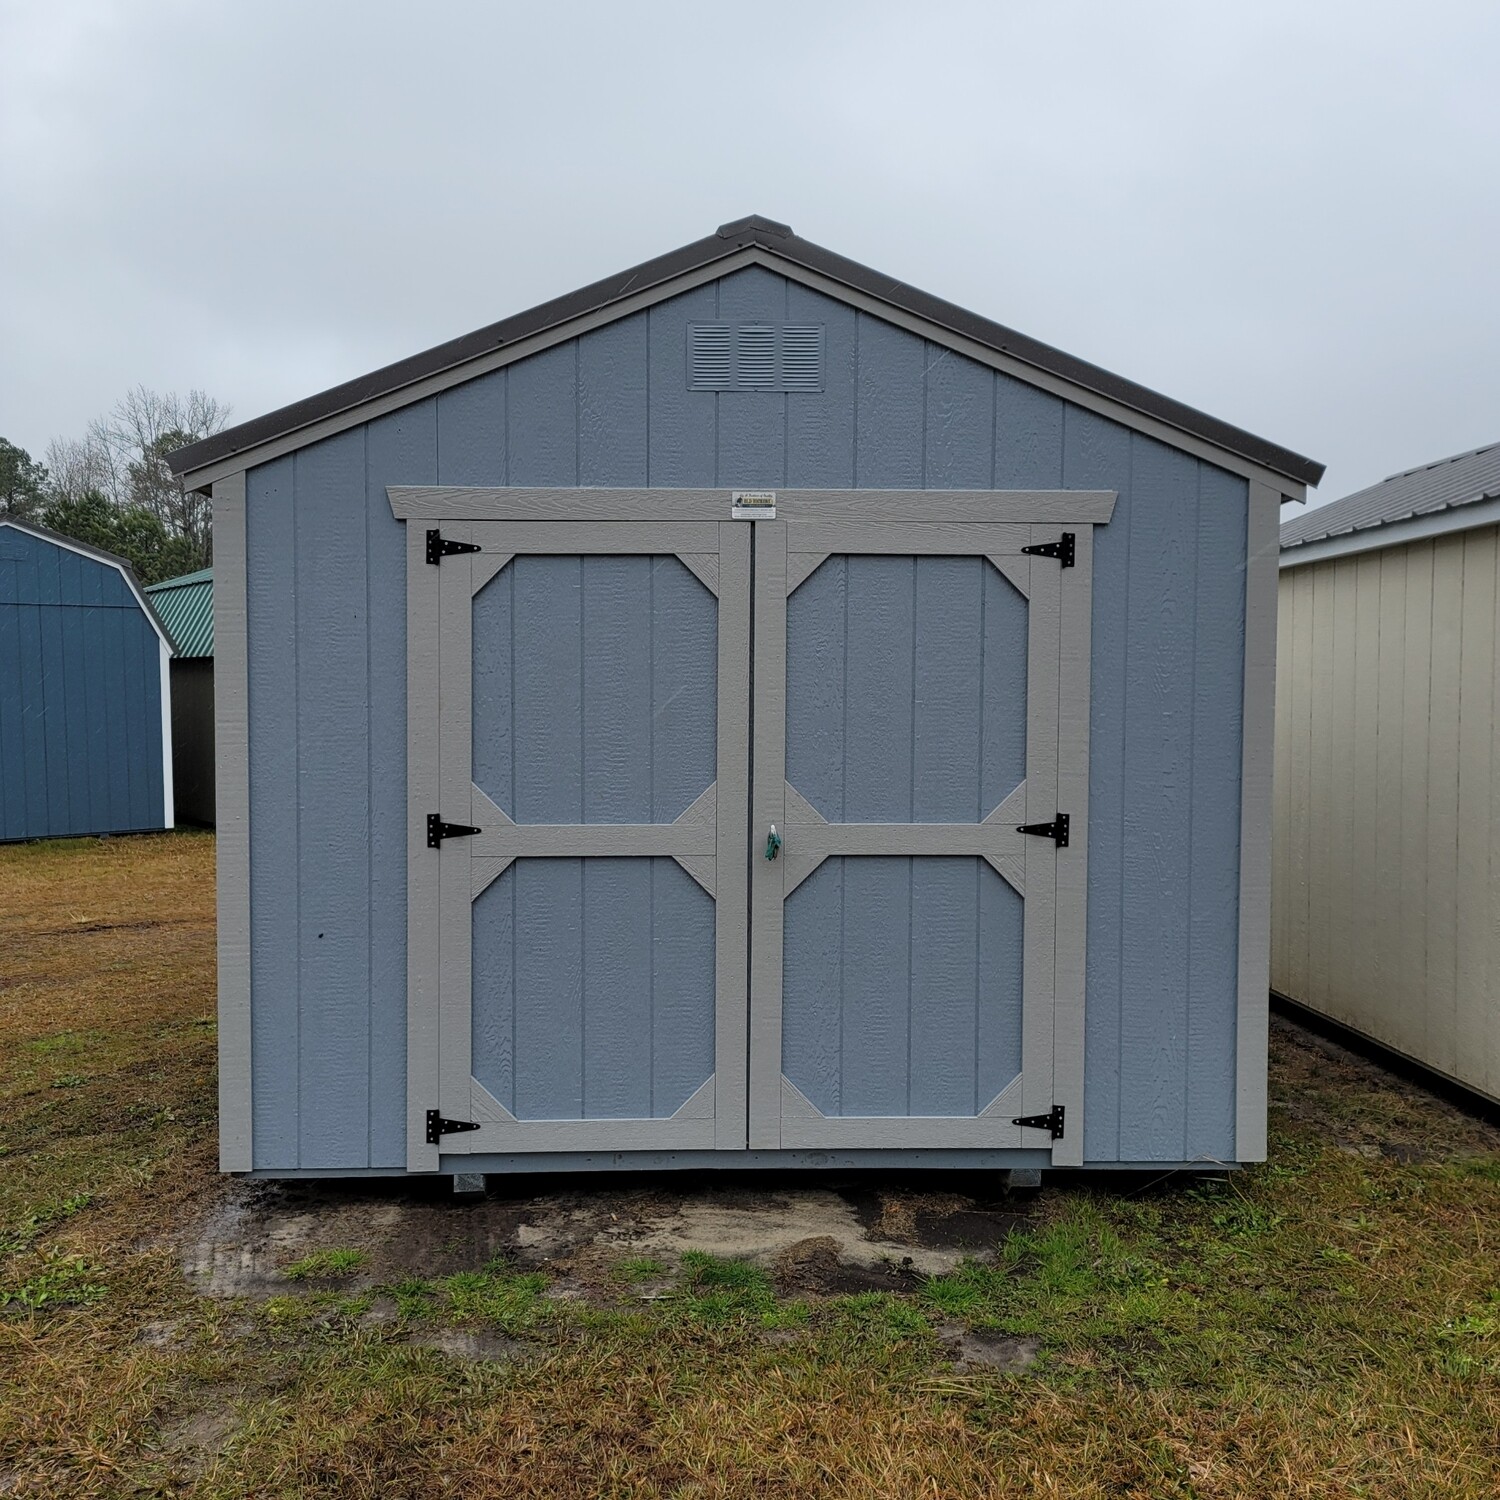 10x12 Utility Shed-Front Entrance